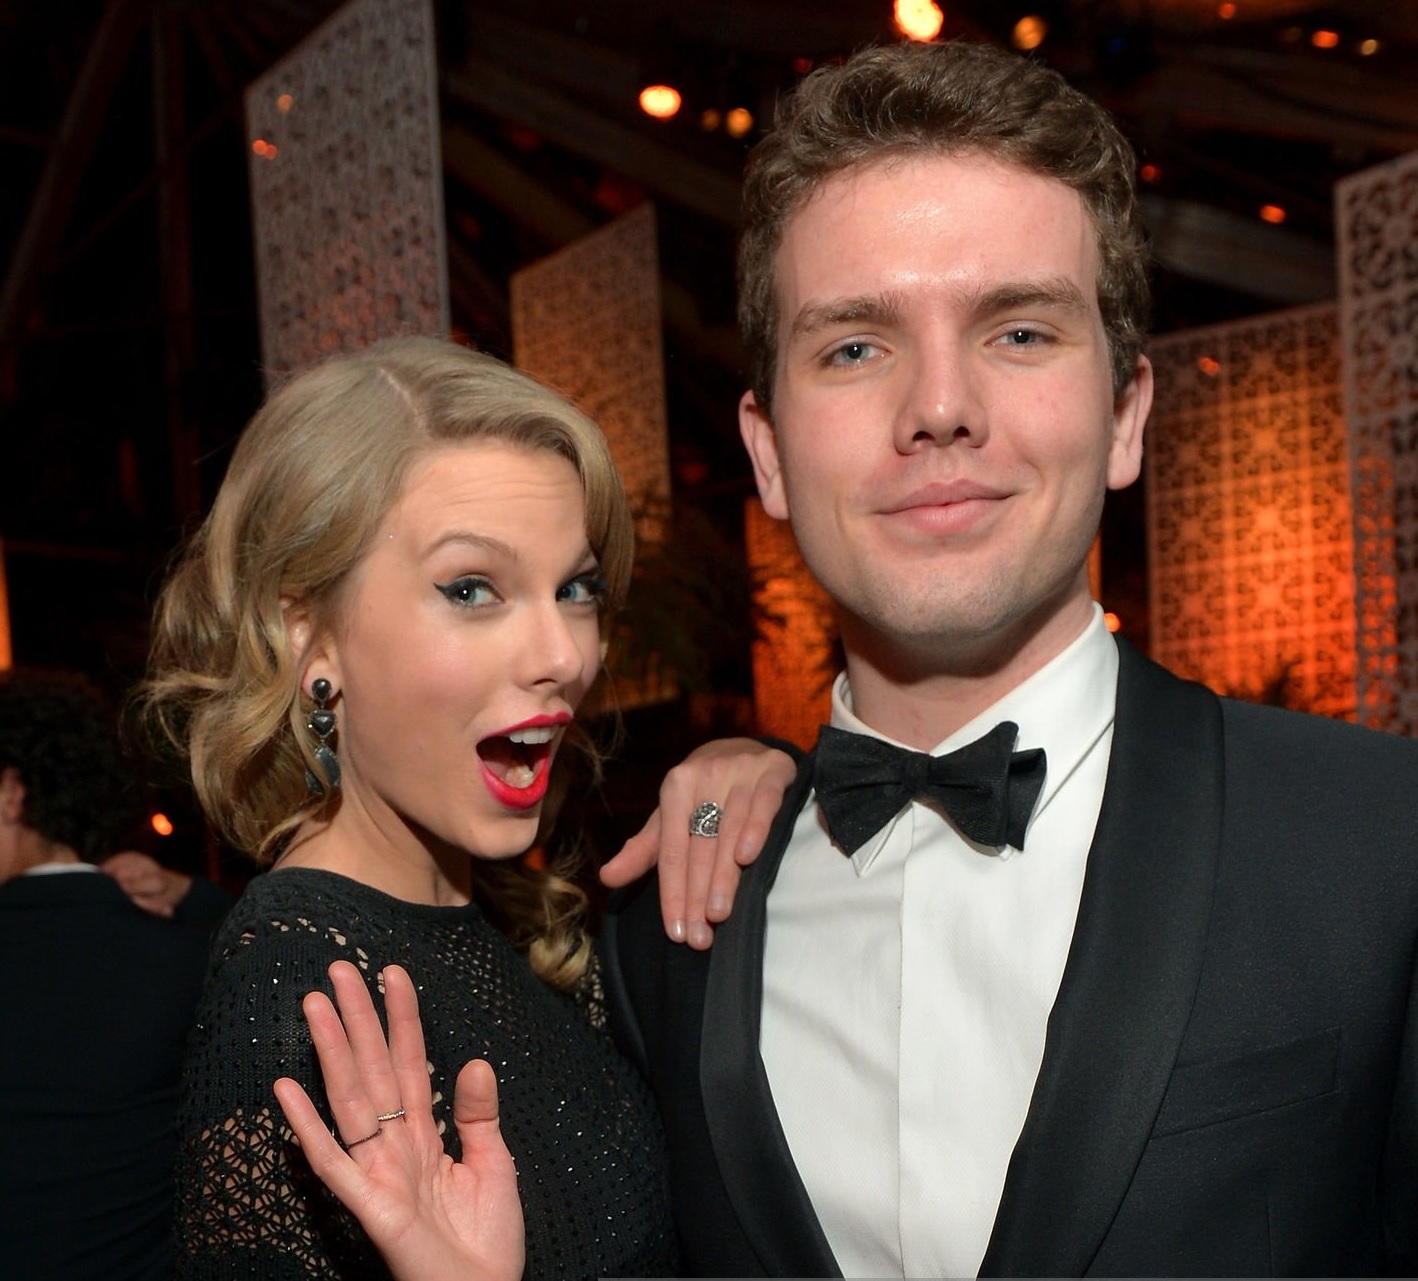 Taylor Swift  and Austin Swift attend The Weinstein Company & Netflix's 2014 Golden Globes After Party